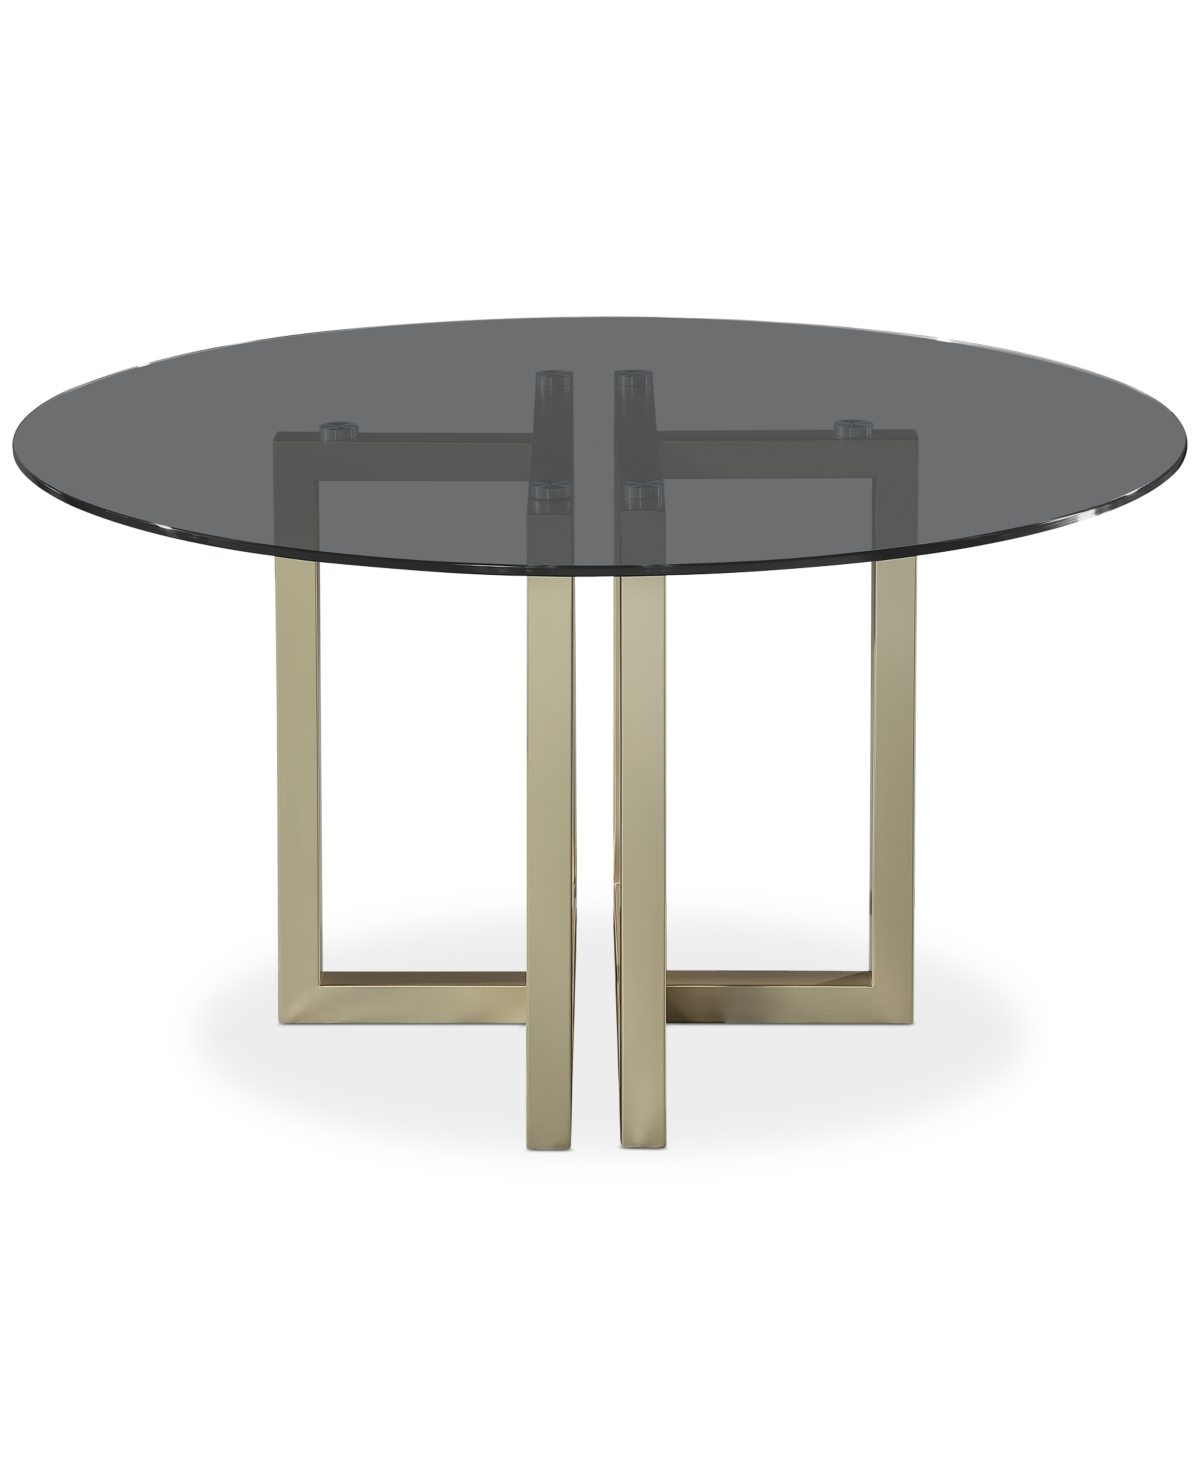 Furniture Emila 54" Round Glass Mix And Match Dining Table, Created For Macy's In Smoked Glass With Champagne Base